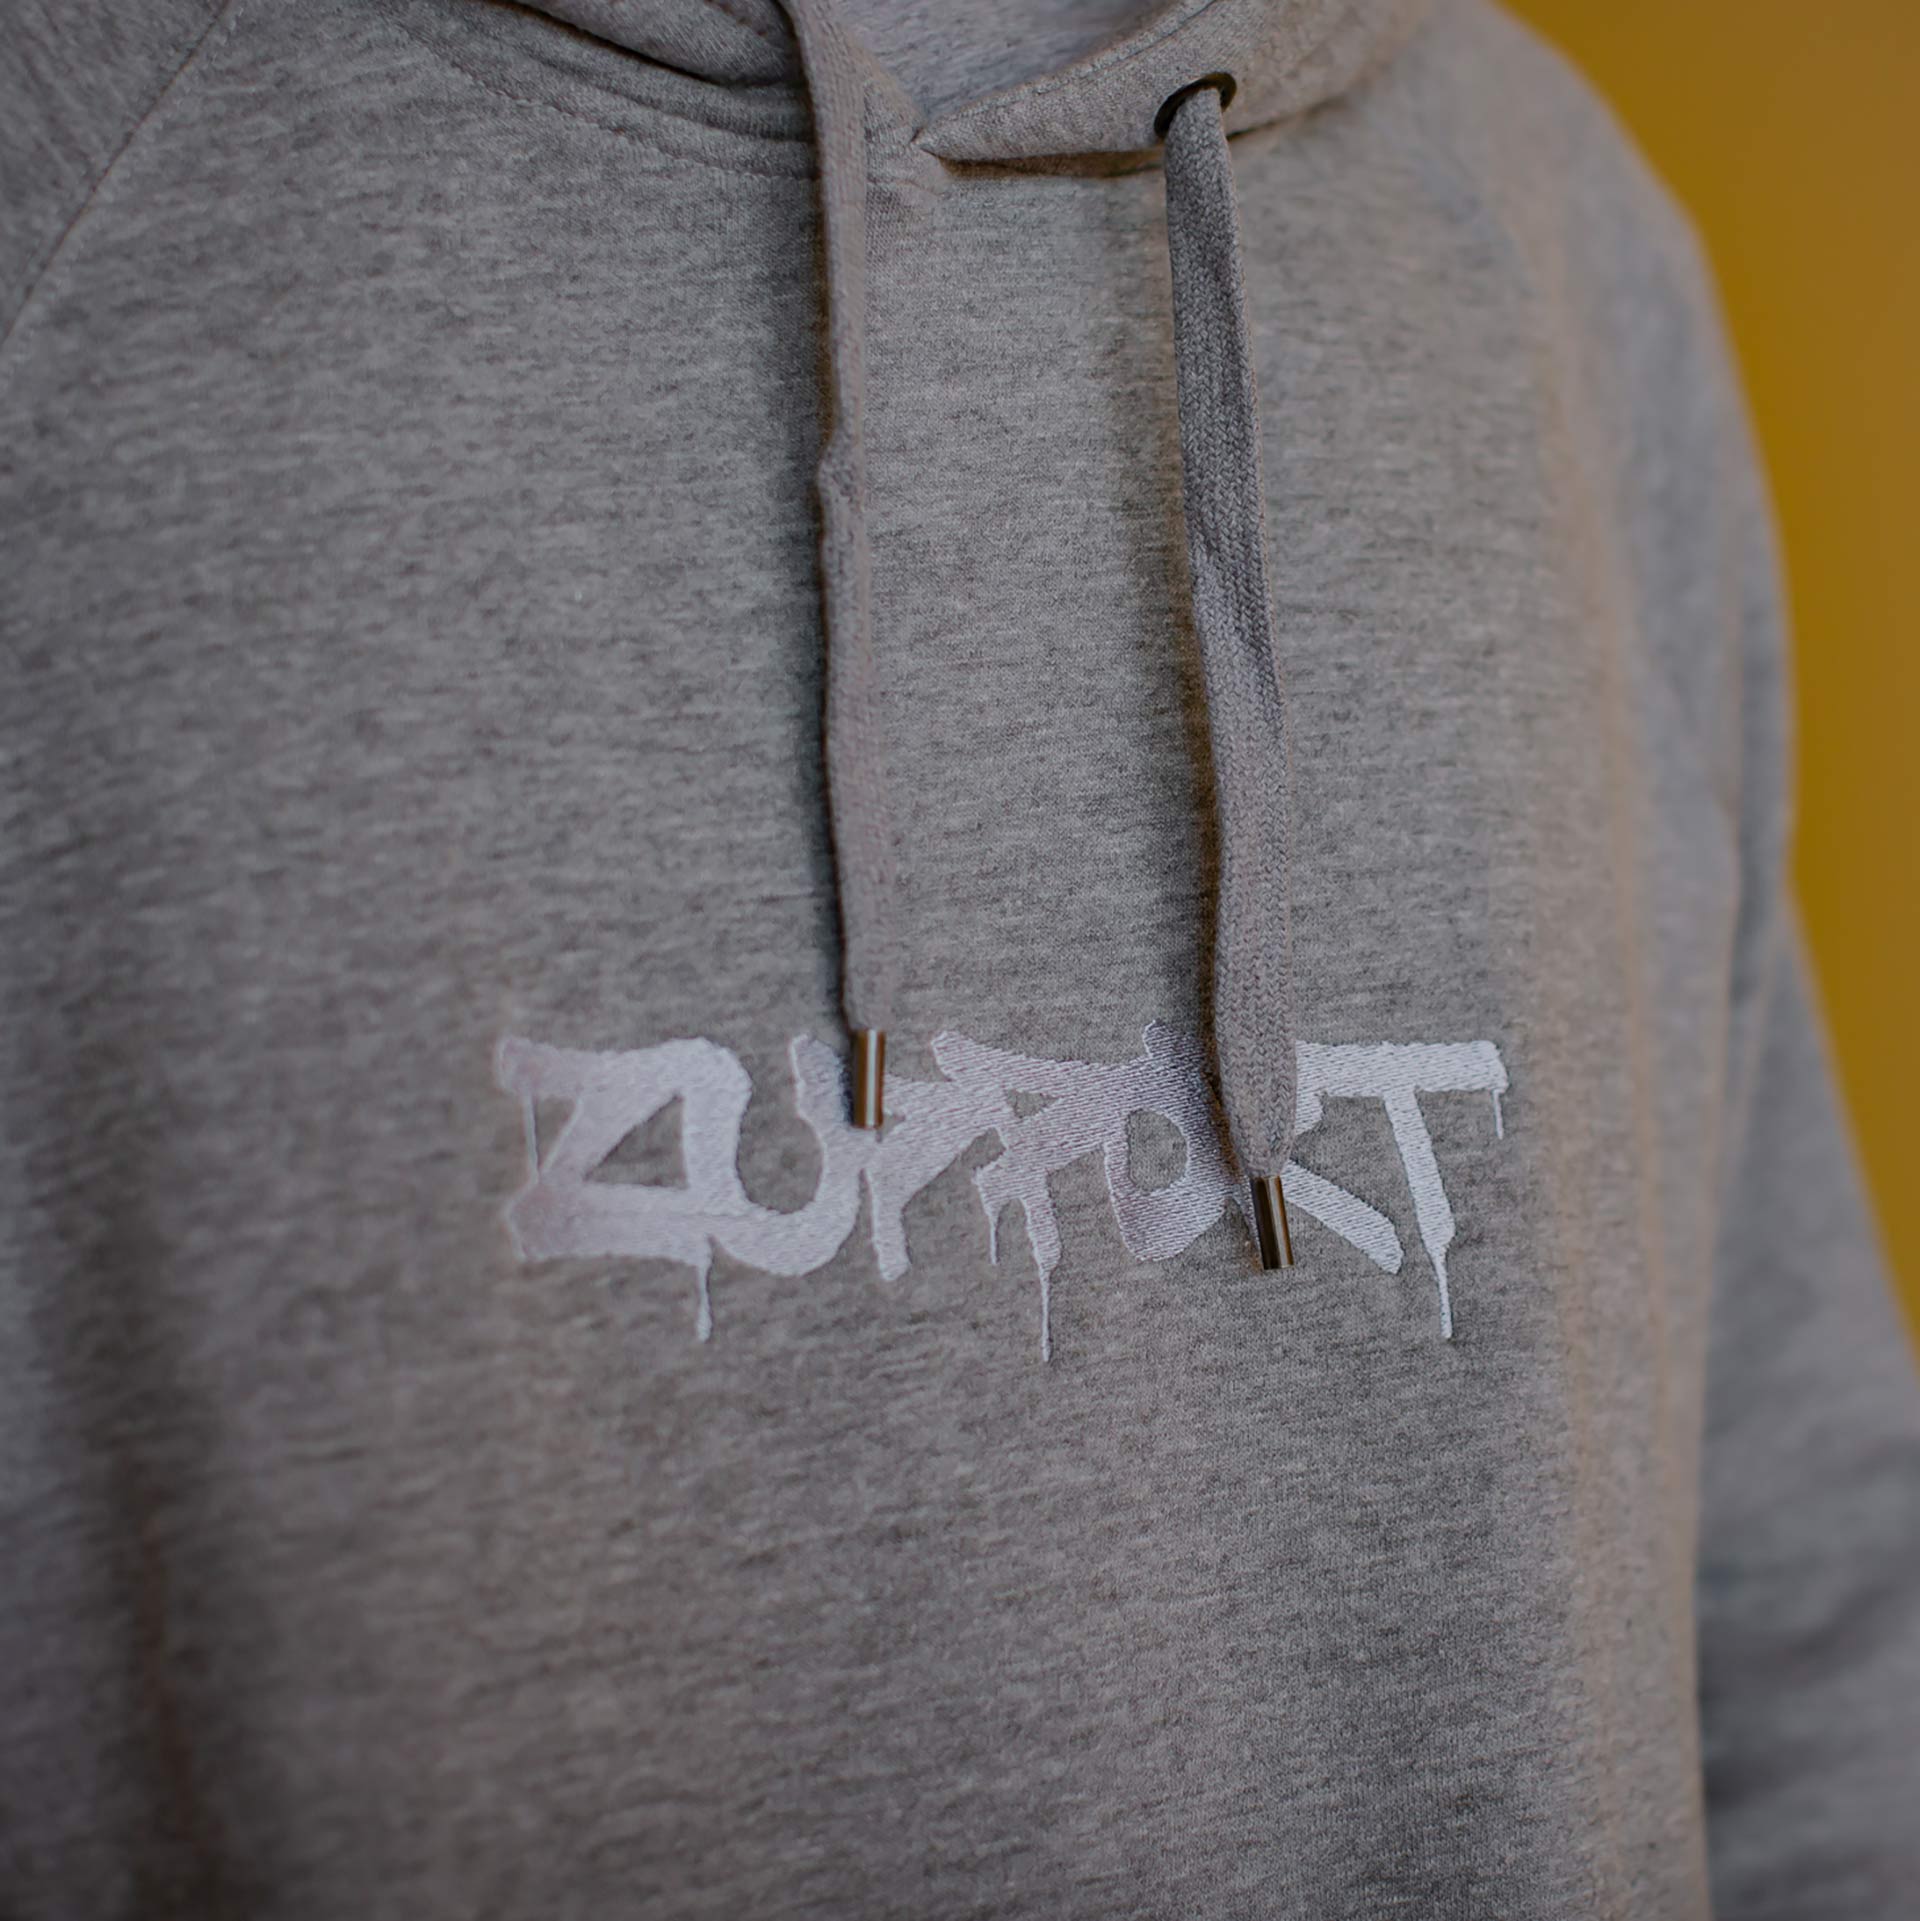 ZUPPORT stitched Tag Logo Hoody heather grey